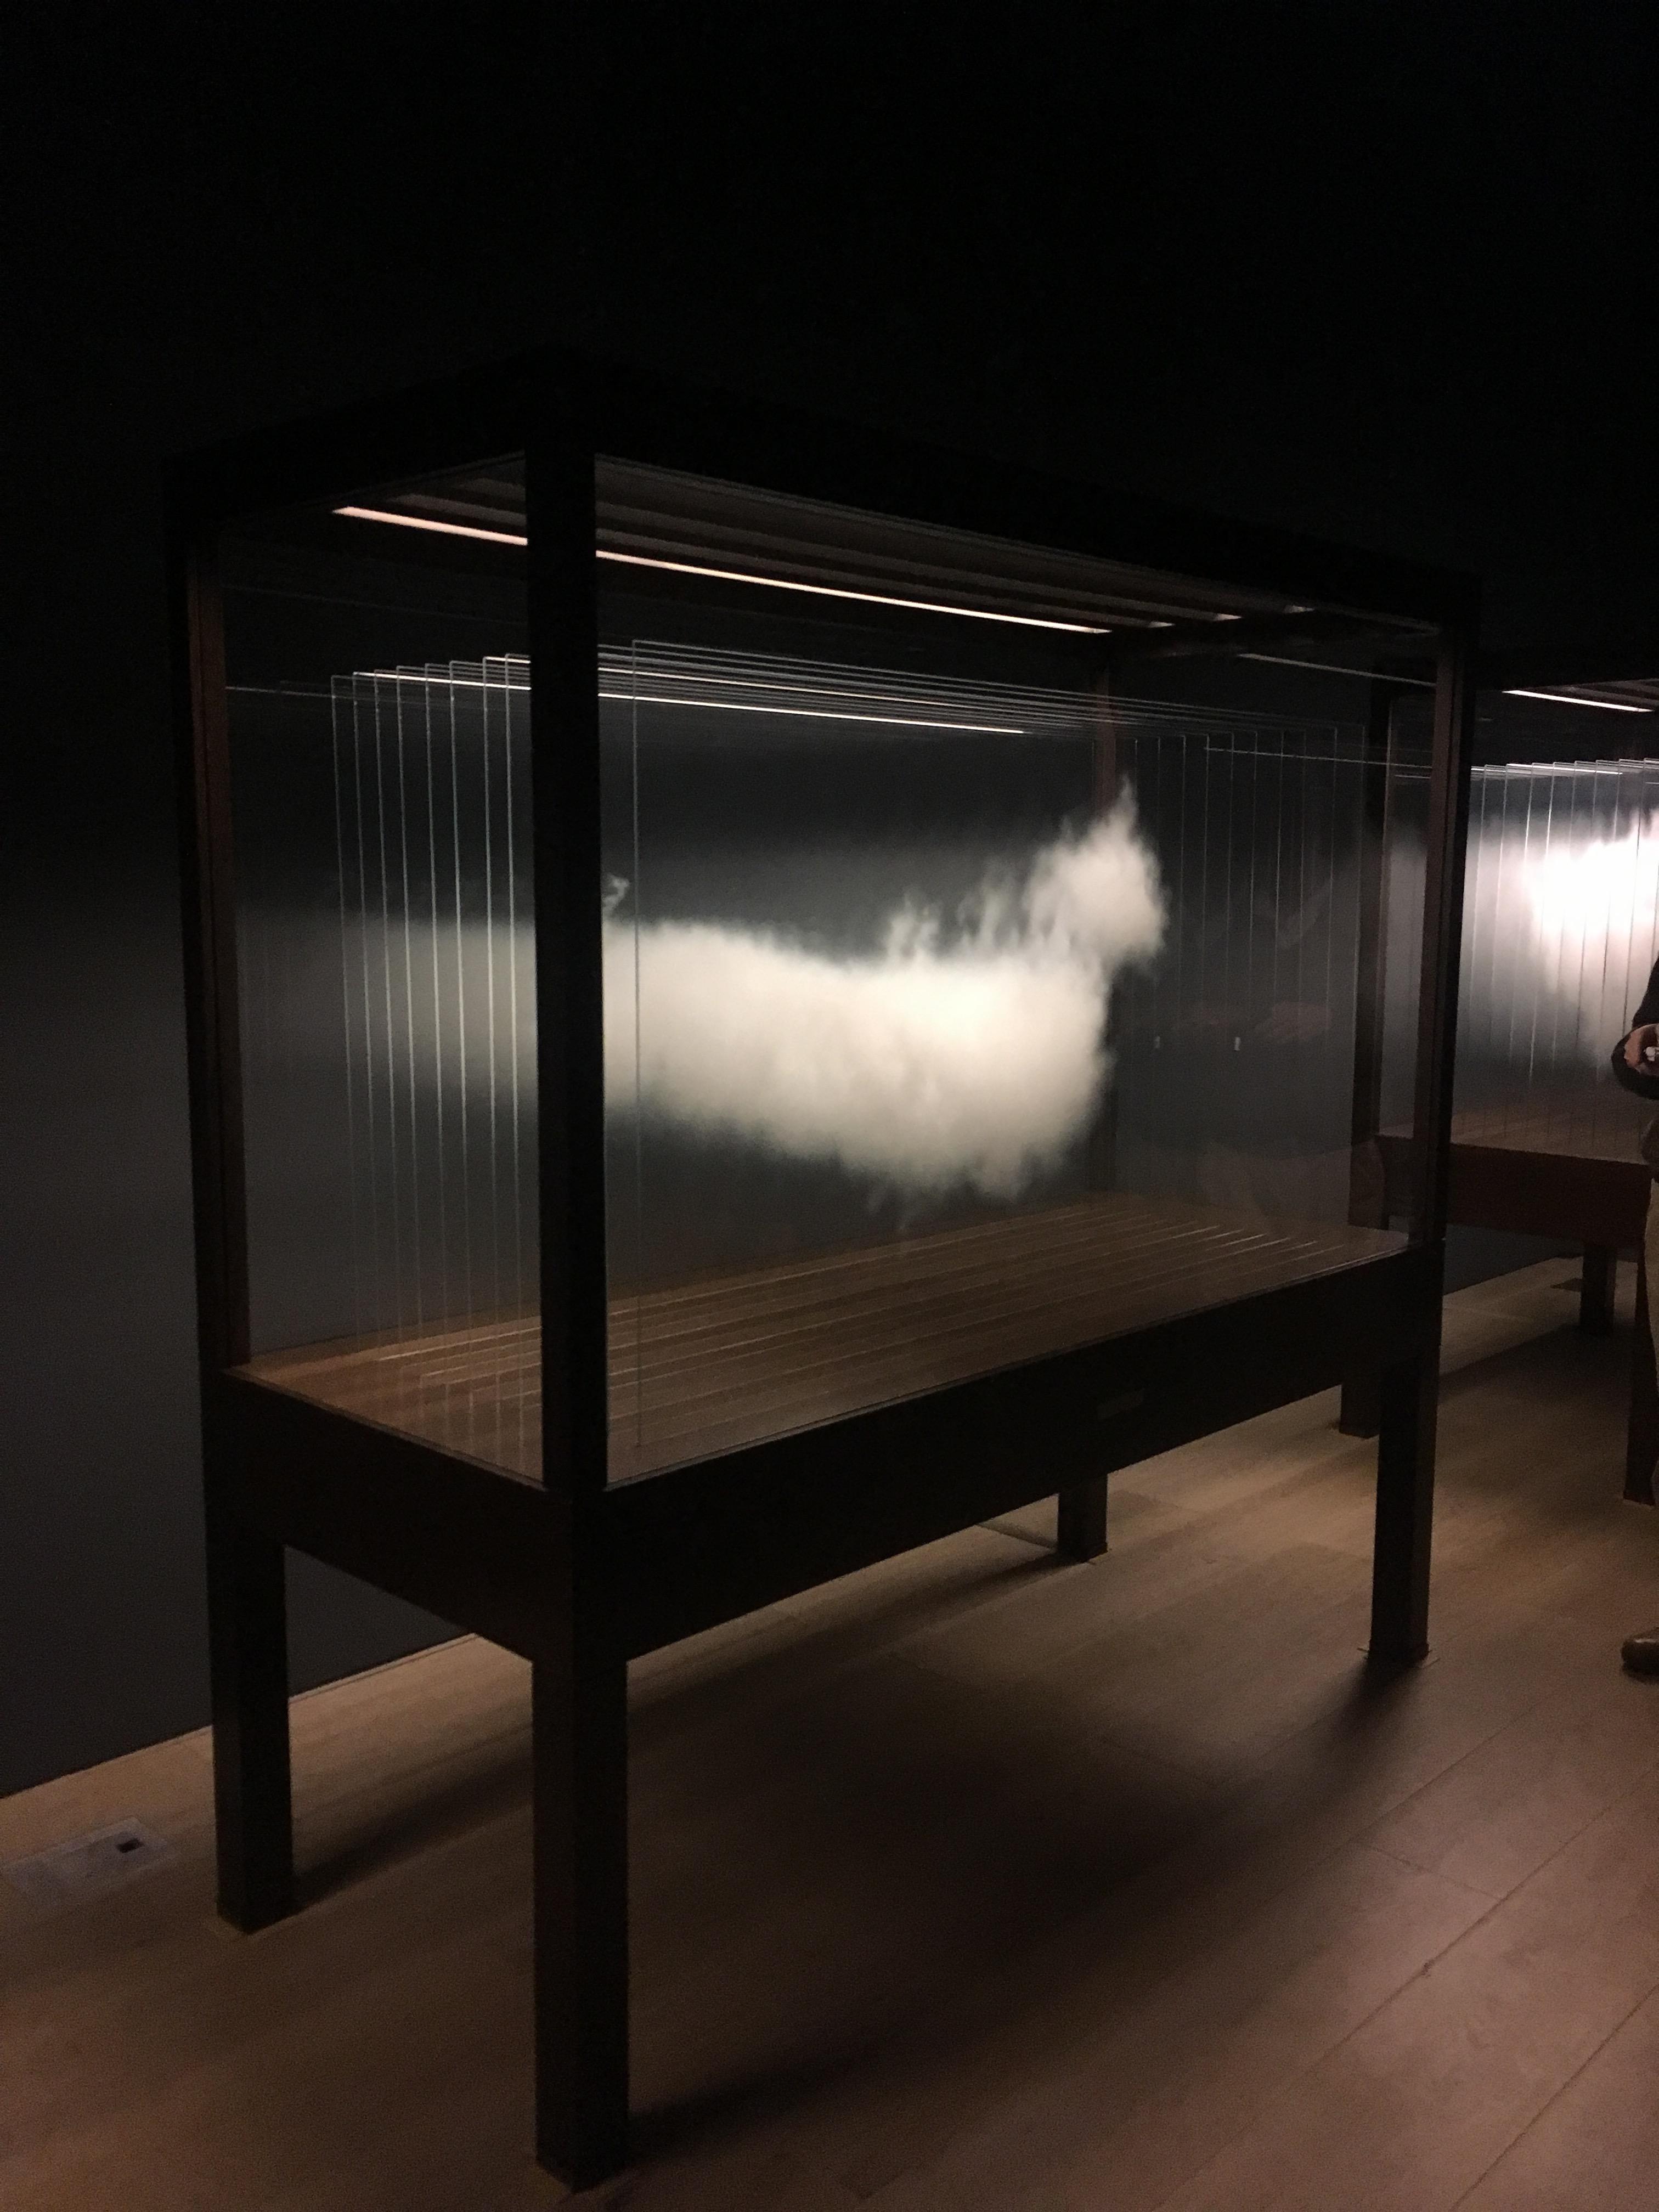 New works of Leandro Erlich @Mori Art Museum　：The Cloud (Japan)